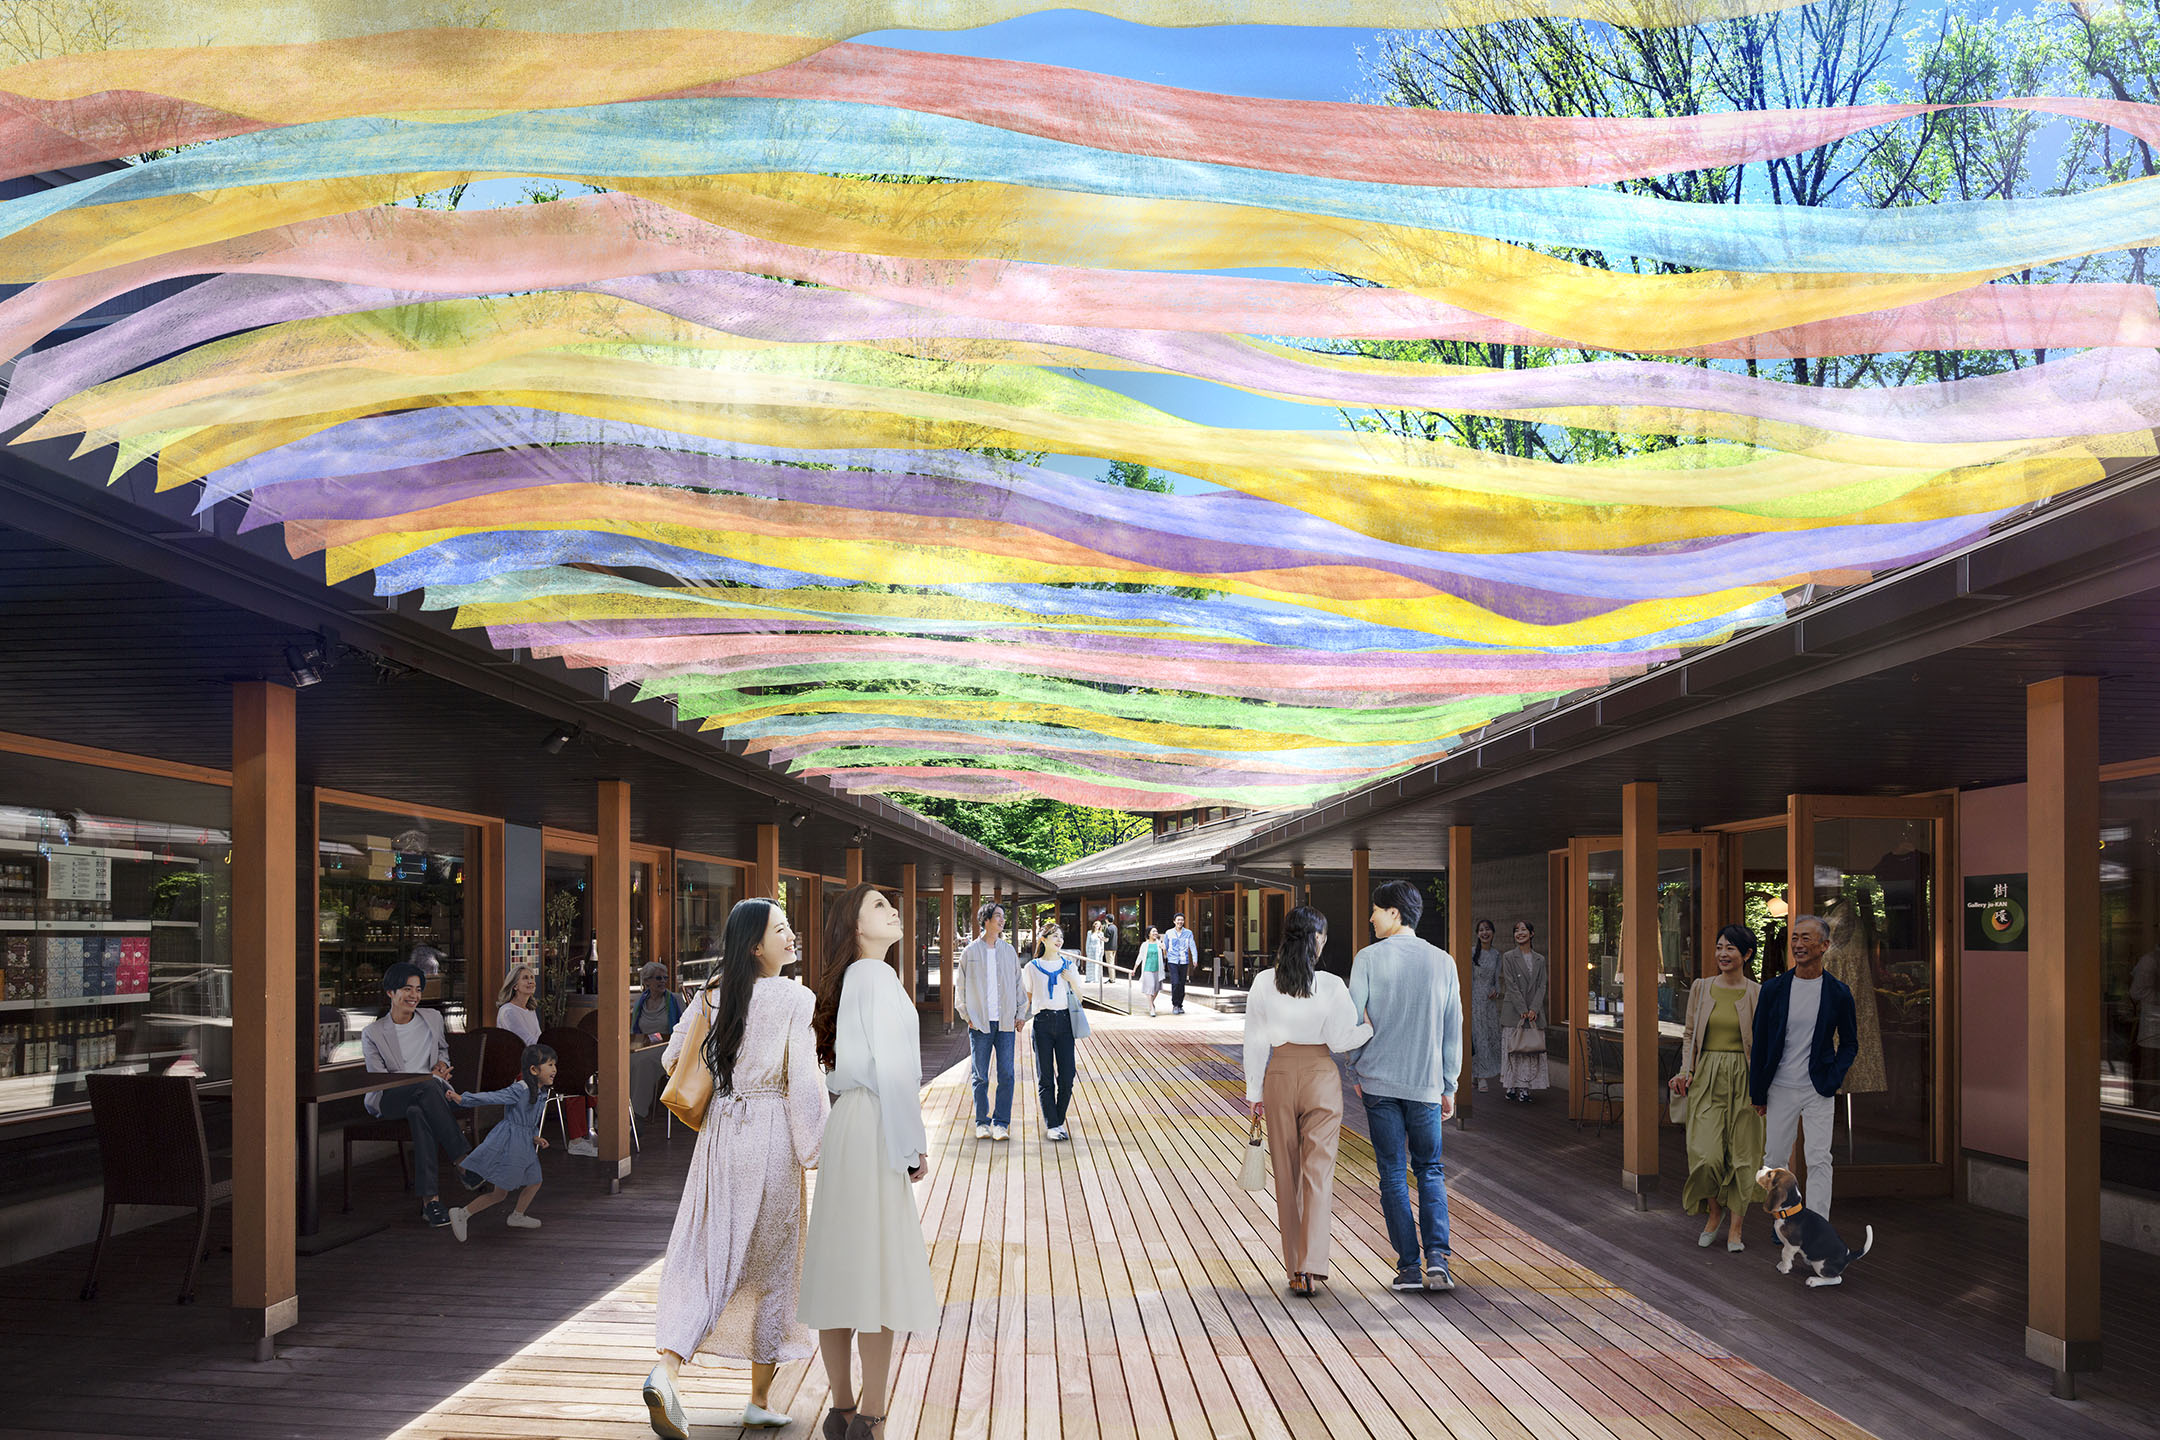 "Organic Wind" is a colorful installation of 110 colors dyed with natural materials.